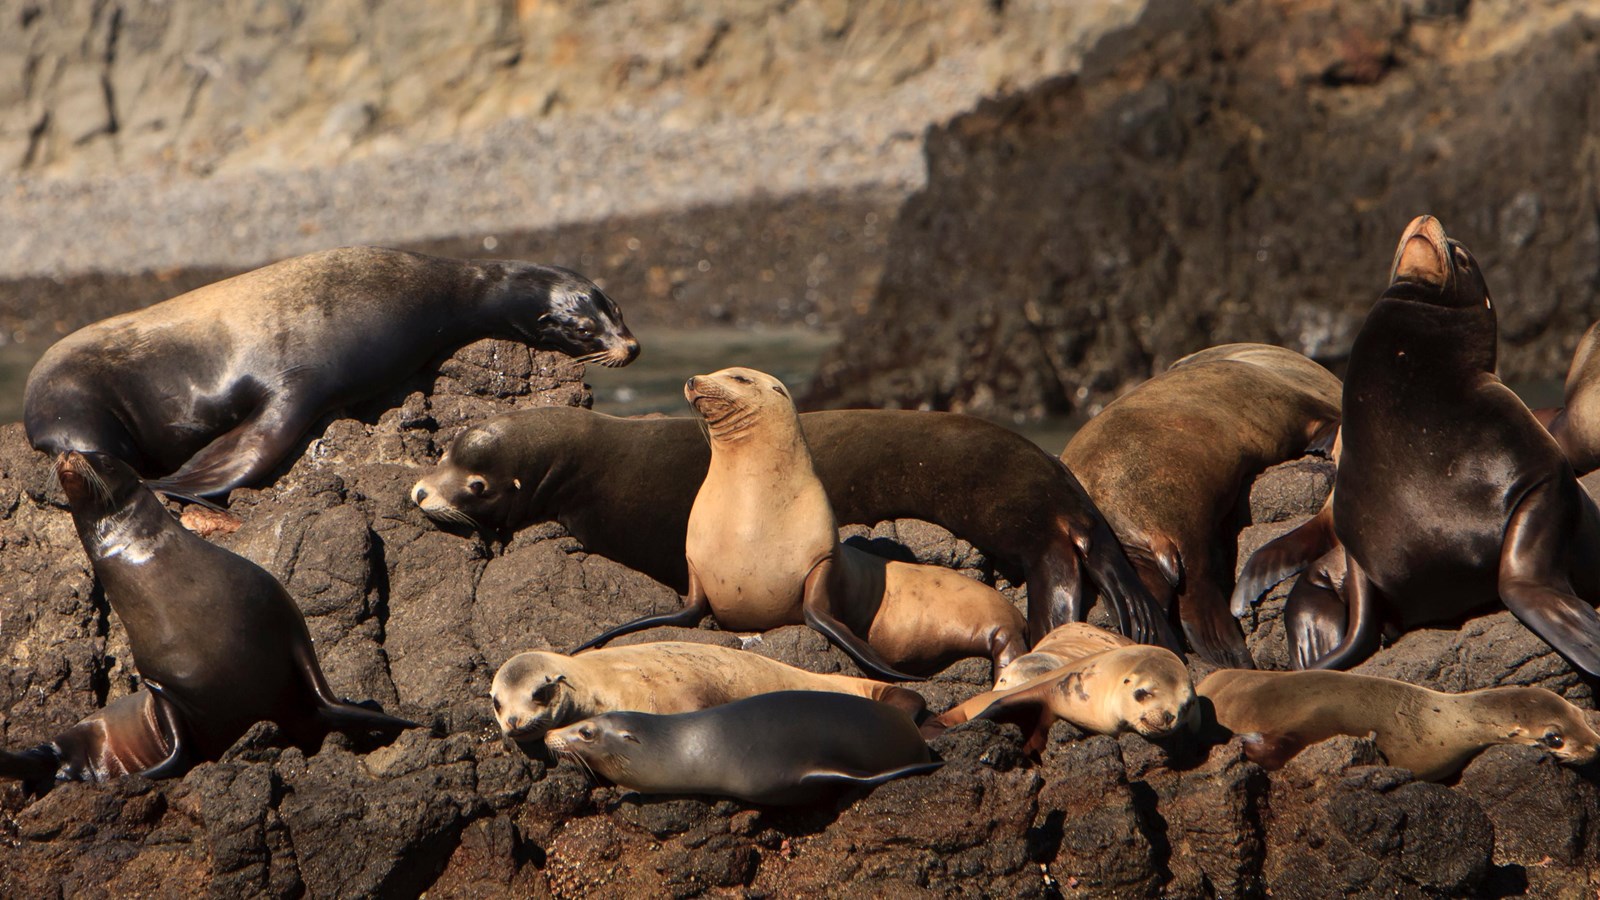 California sea lions, large torpedo shaped animals with flippers, on rocks